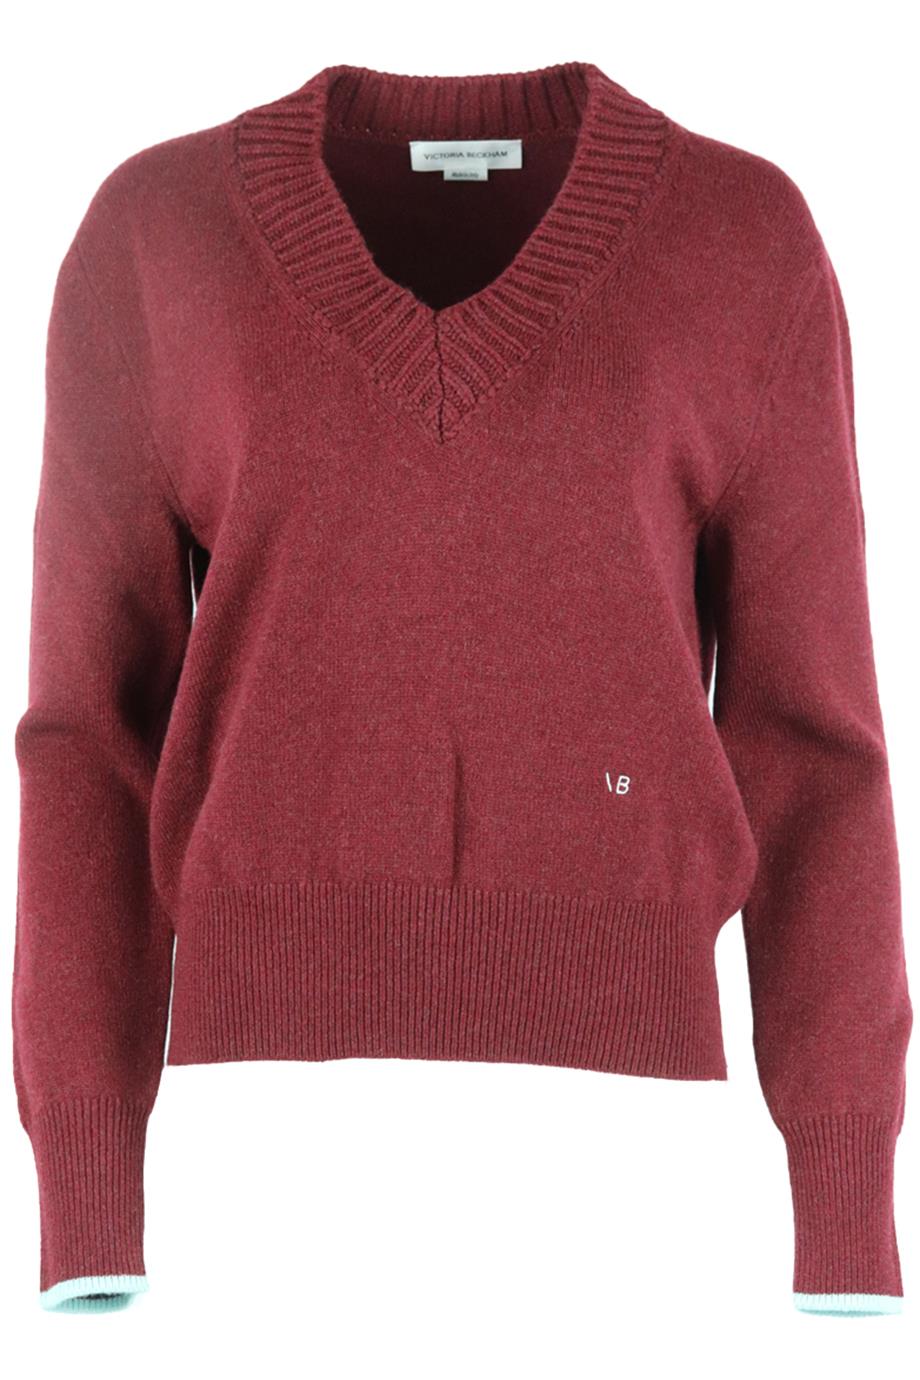 VICTORIA BECKHAM LOGO EMBROIDERED CASHMERE BLEND SWEATER SMALL